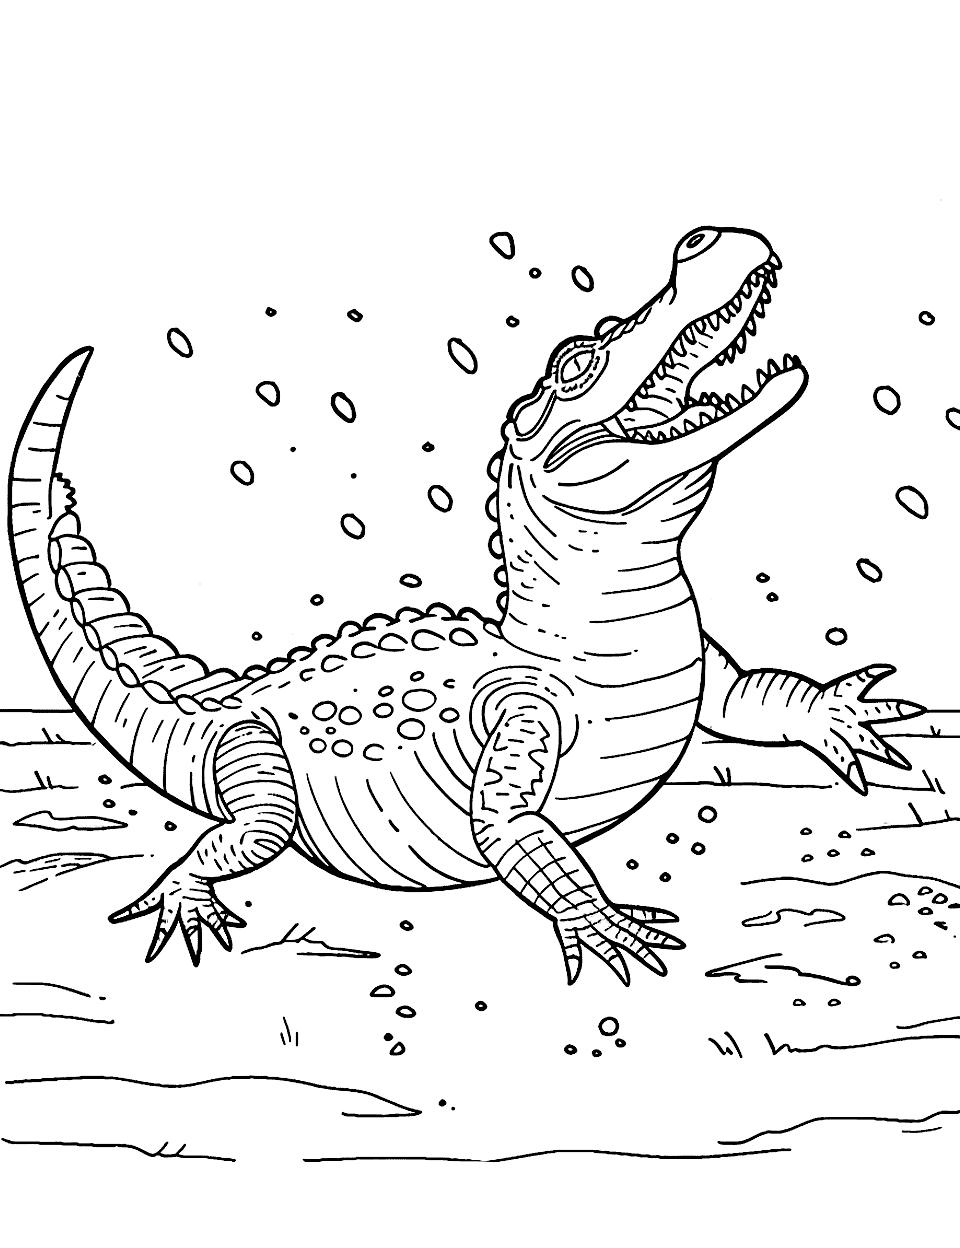 Snowy Day Crocodile Coloring Page - A crocodile being amazed by the snowflakes gently falling around.